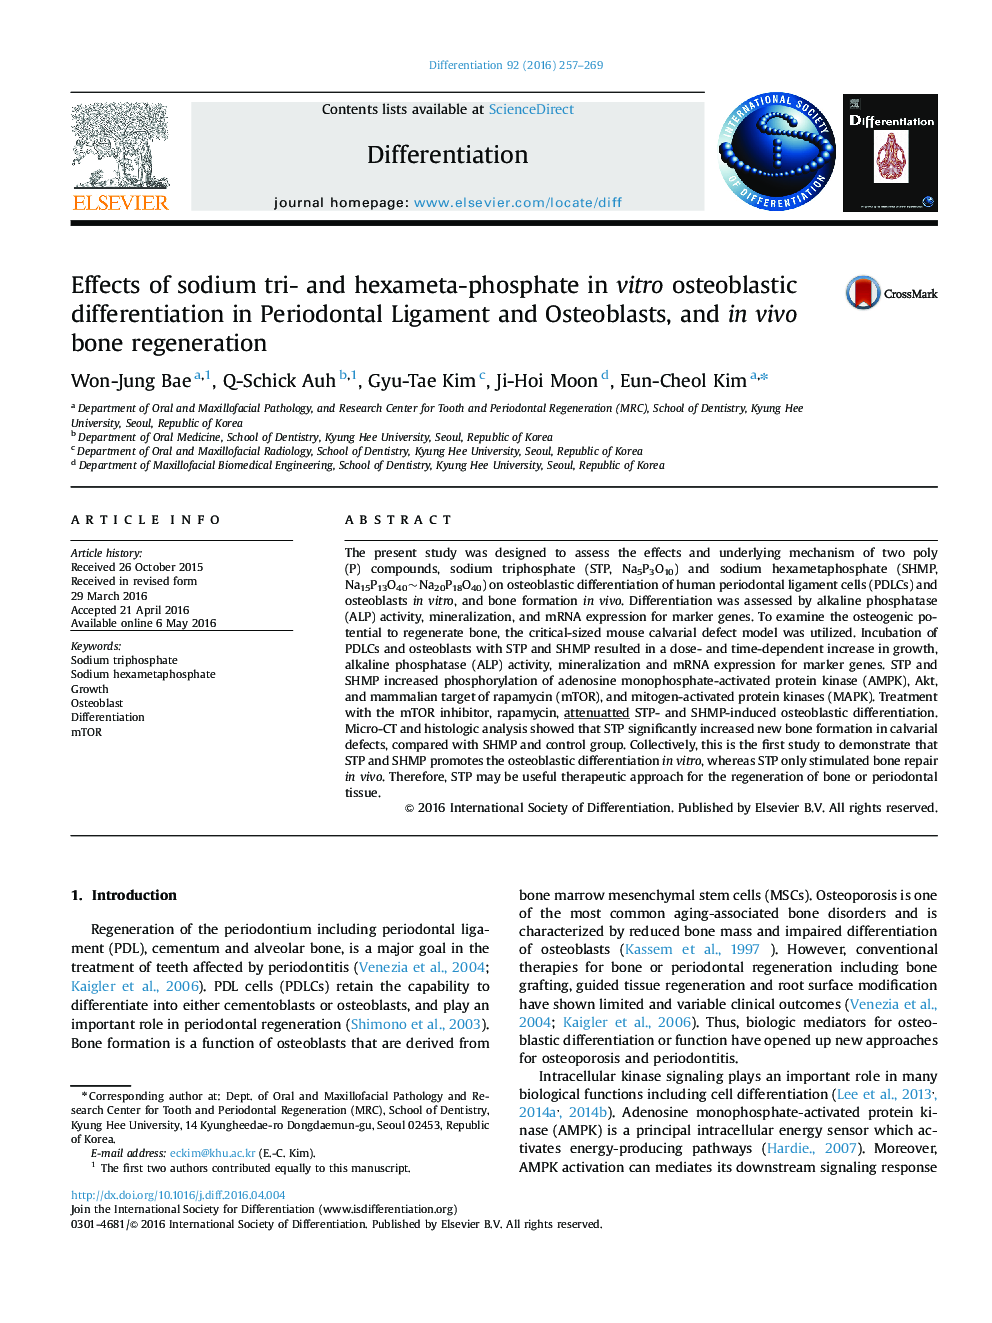 Effects of sodium tri- and hexameta-phosphate in vitro osteoblastic differentiation in Periodontal Ligament and Osteoblasts, and in vivo bone regeneration